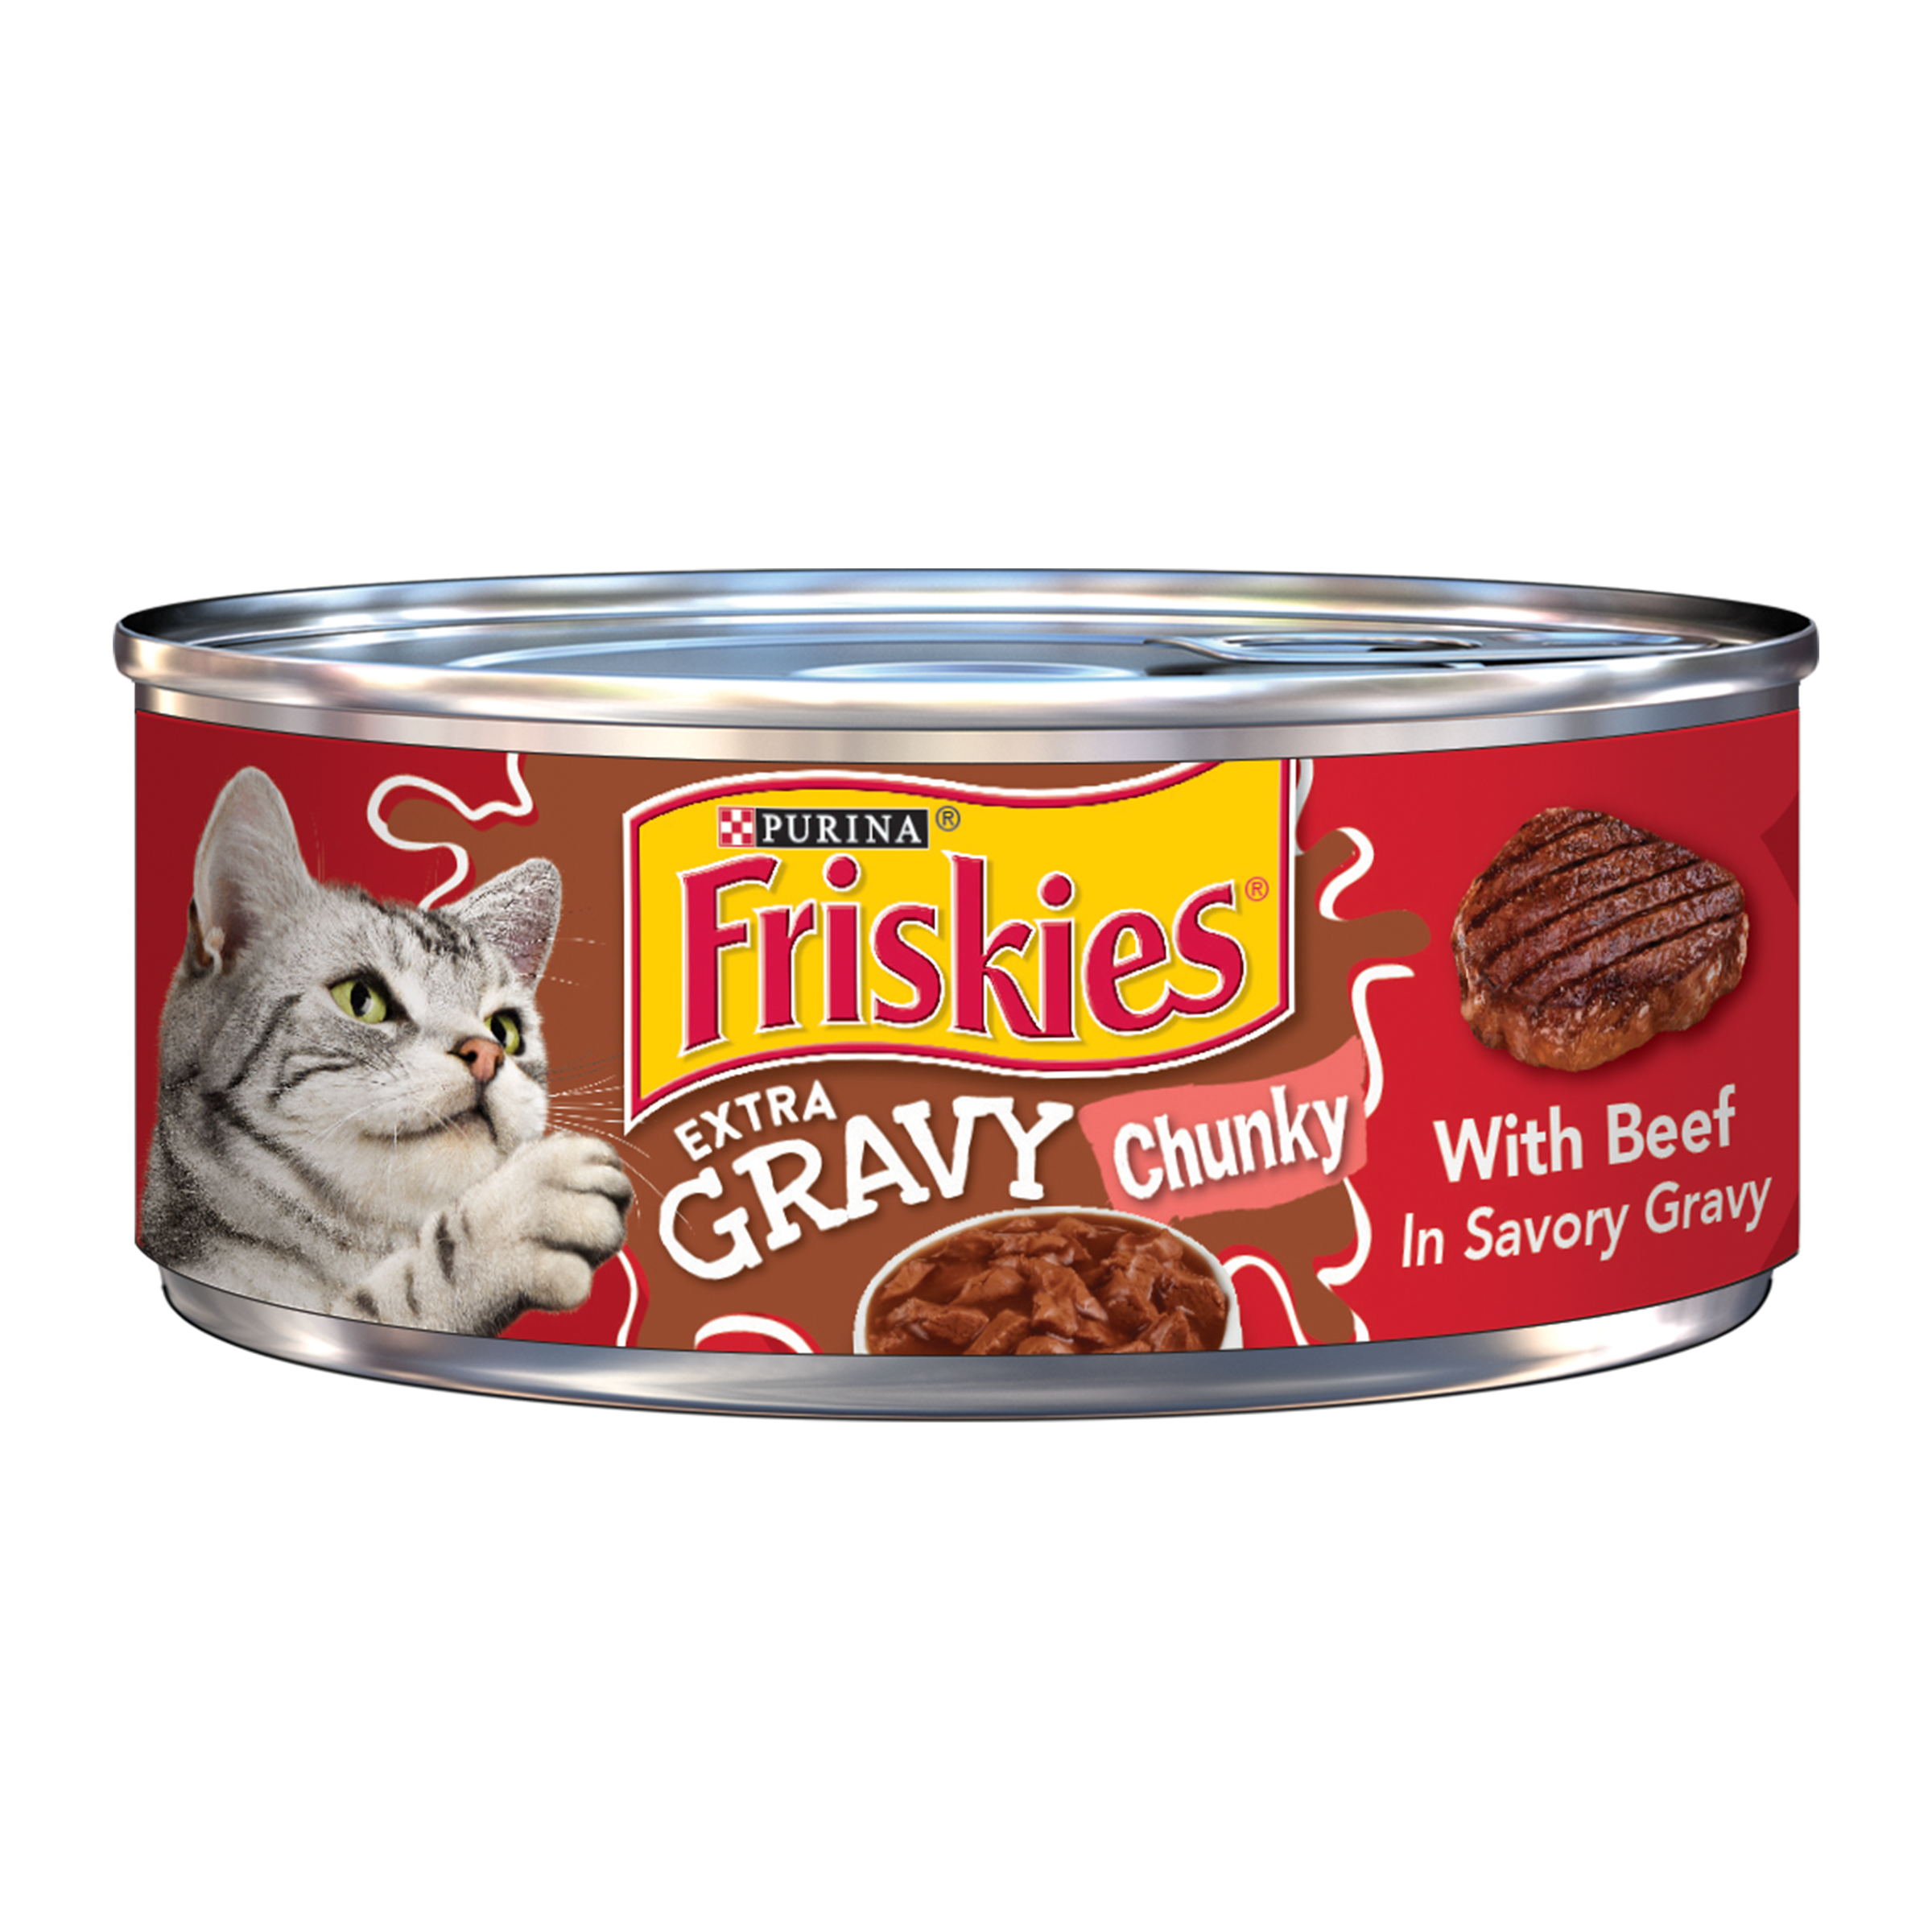 Friskies Gravy Wet Cat Food, Extra Gravy Chunky With Beef in Savory ...